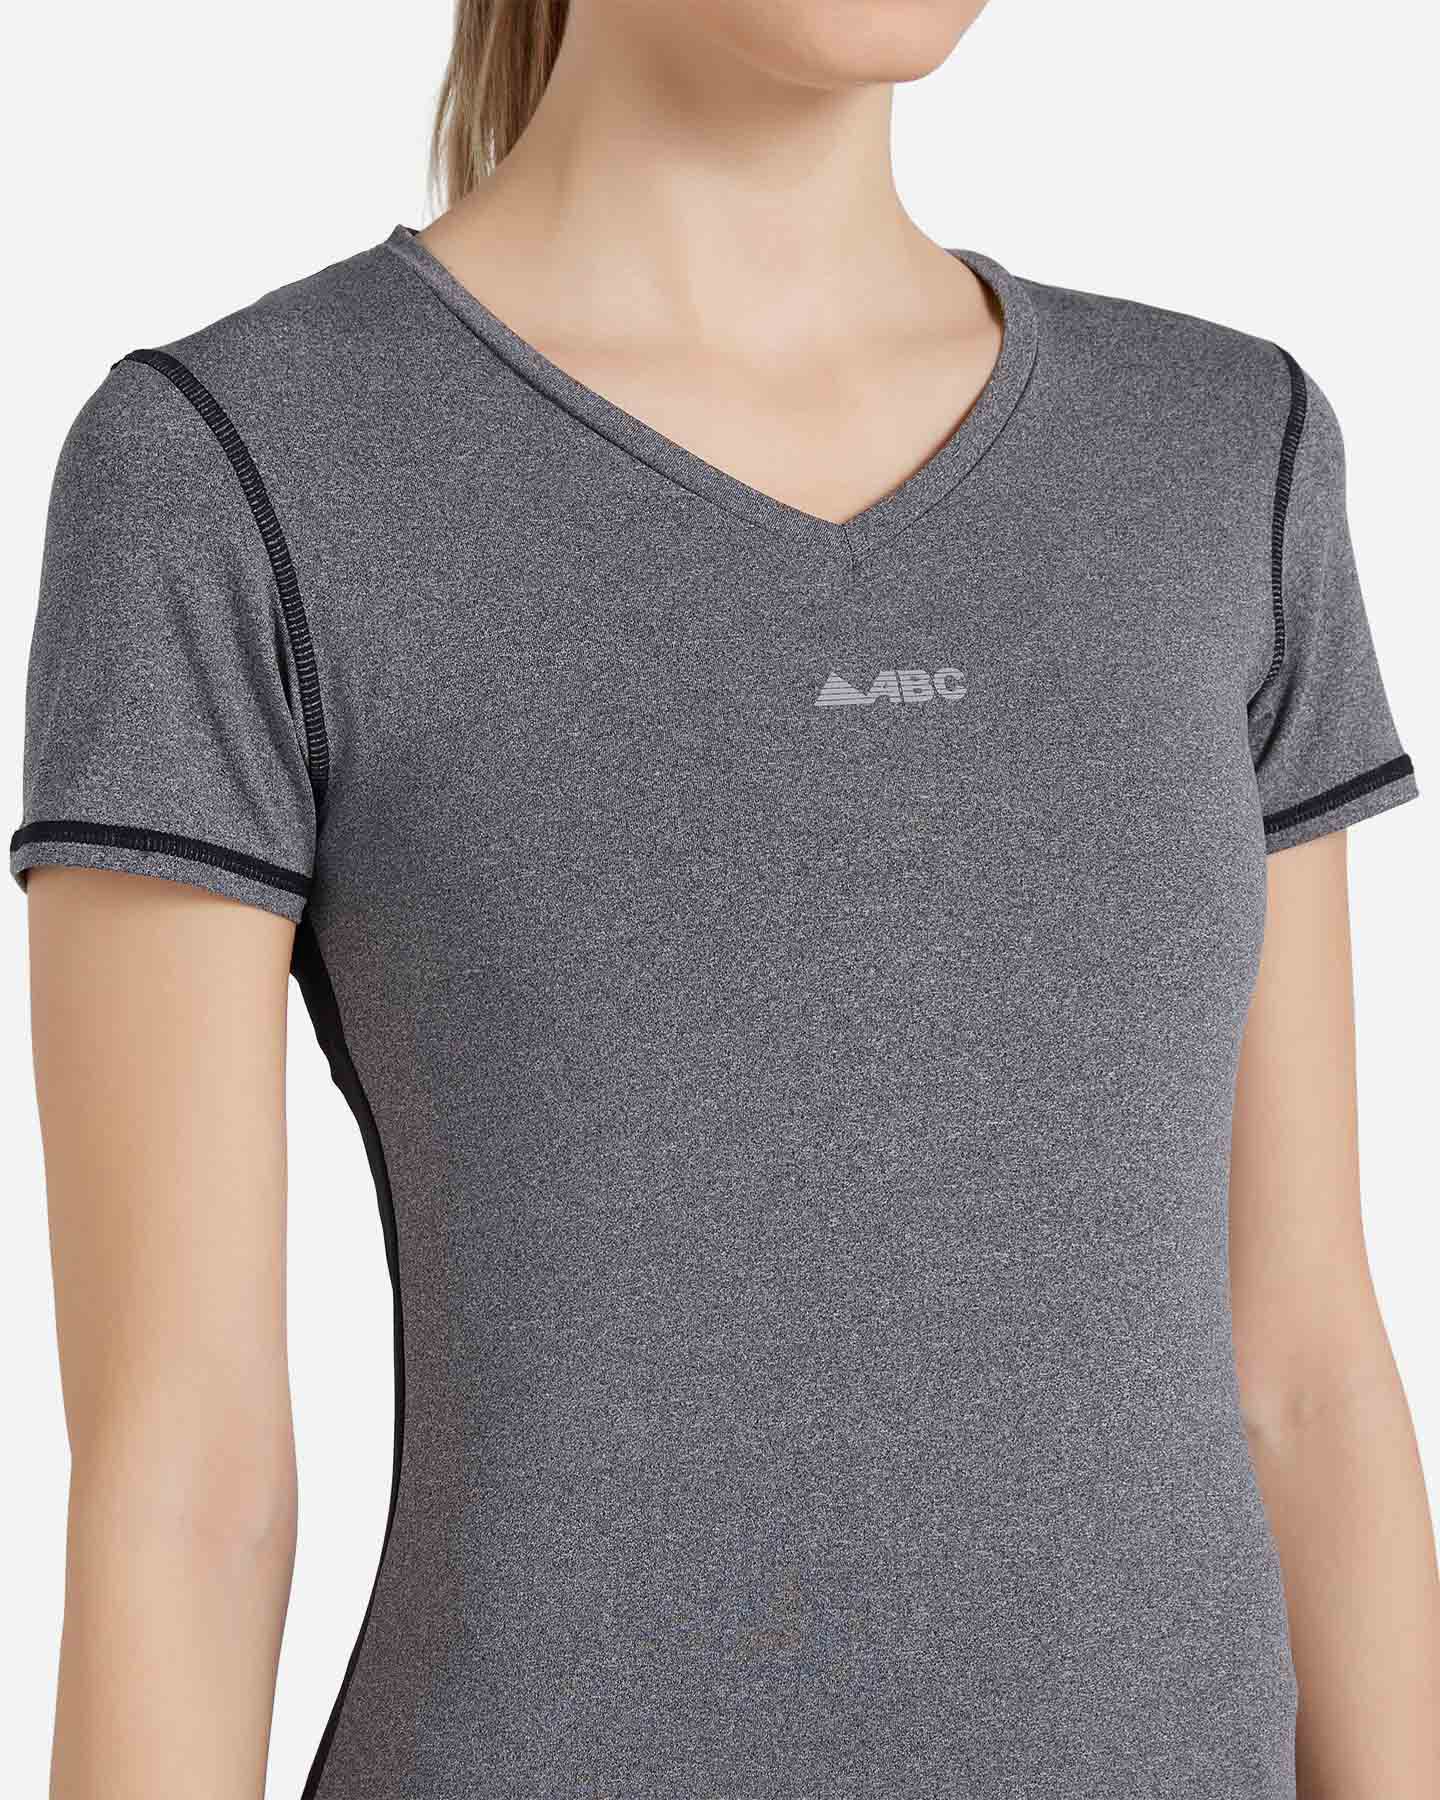  T-Shirt running ABC TECH V NECK W S4088089 scatto 4